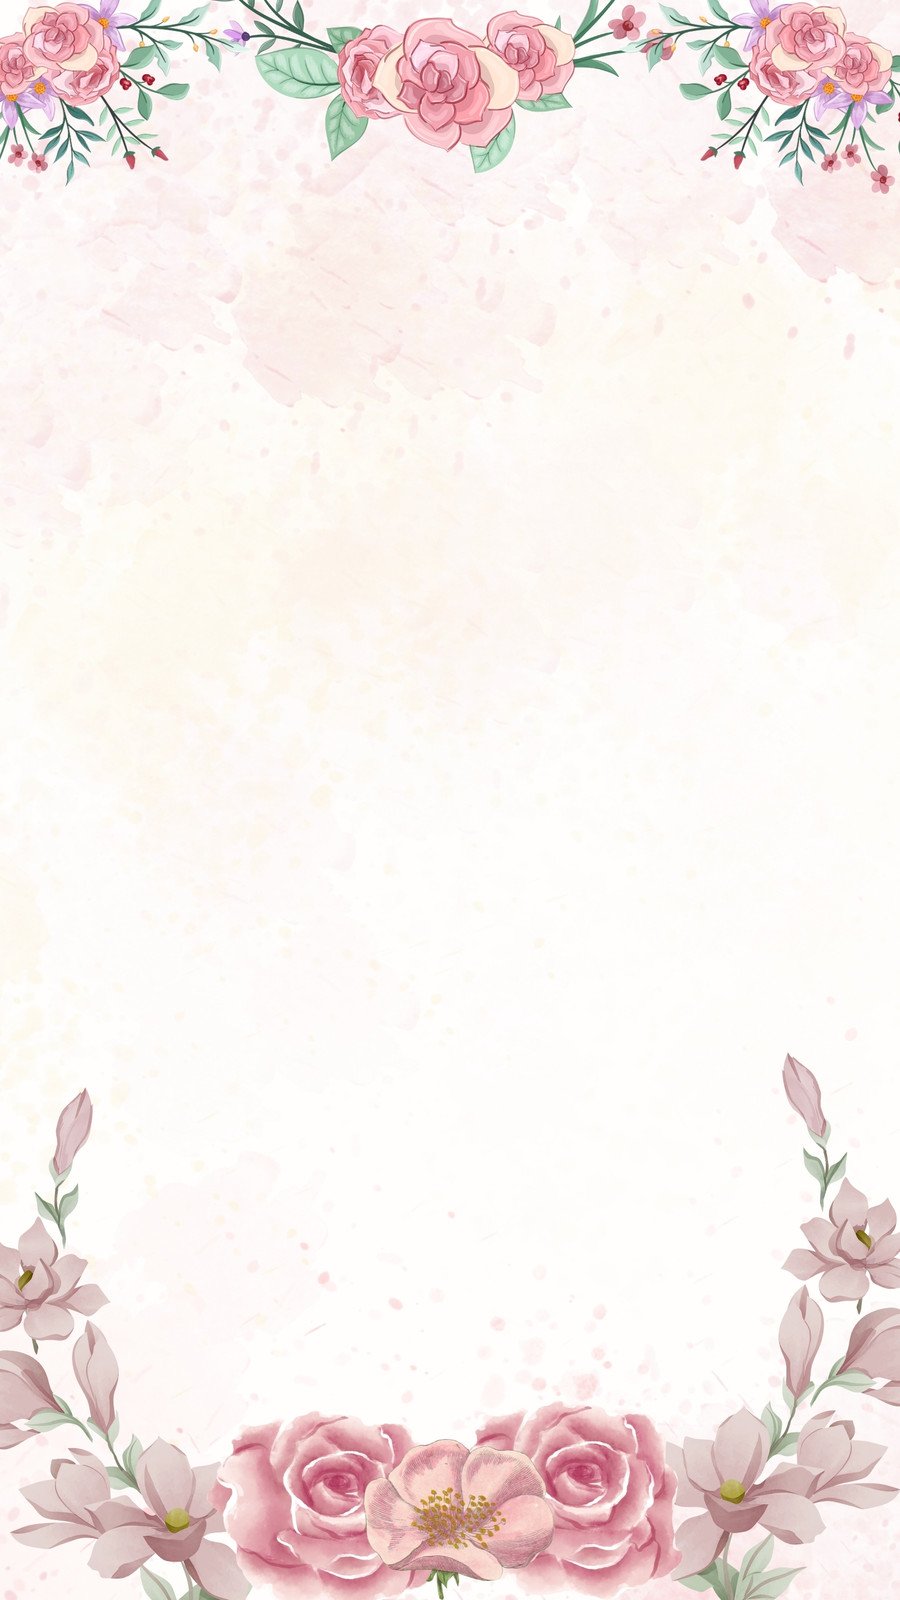 Free and customizable pink floral background templates